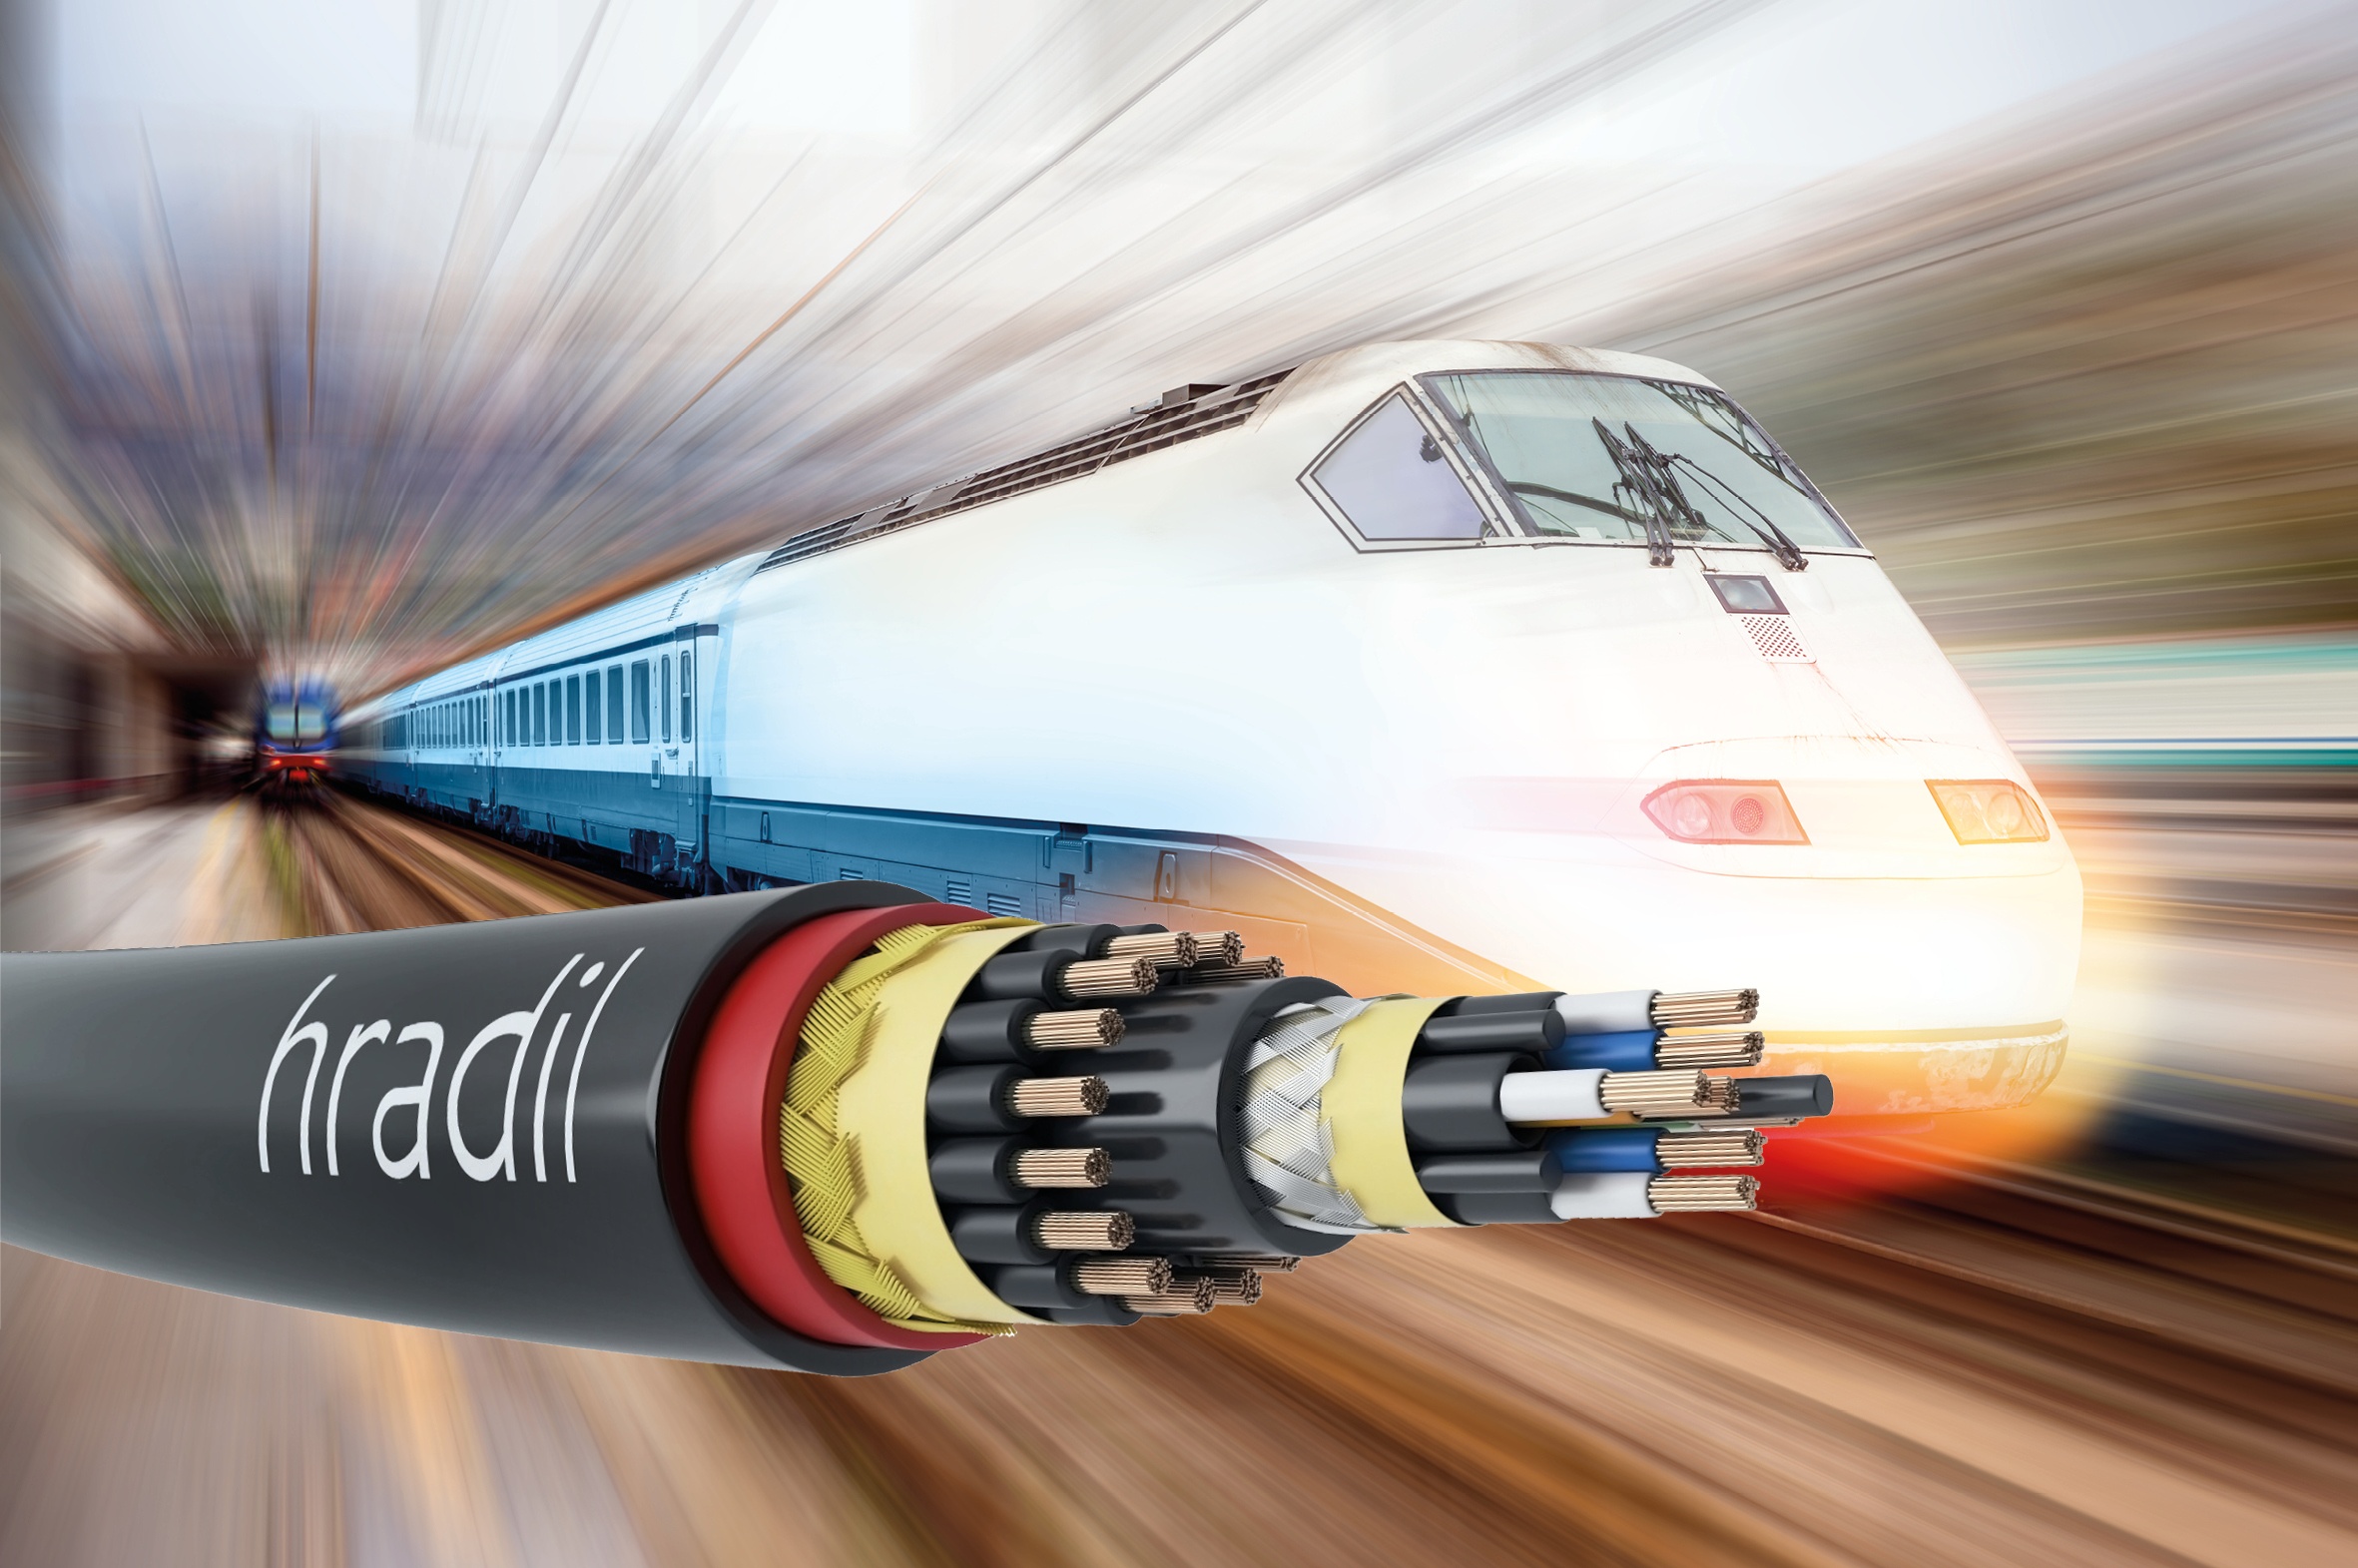  Cat.7 Hradil hybrid cable for railway vehicles for indoor and outdoor use. The high-endurance cable enables the combined transmission of power and high-speed data